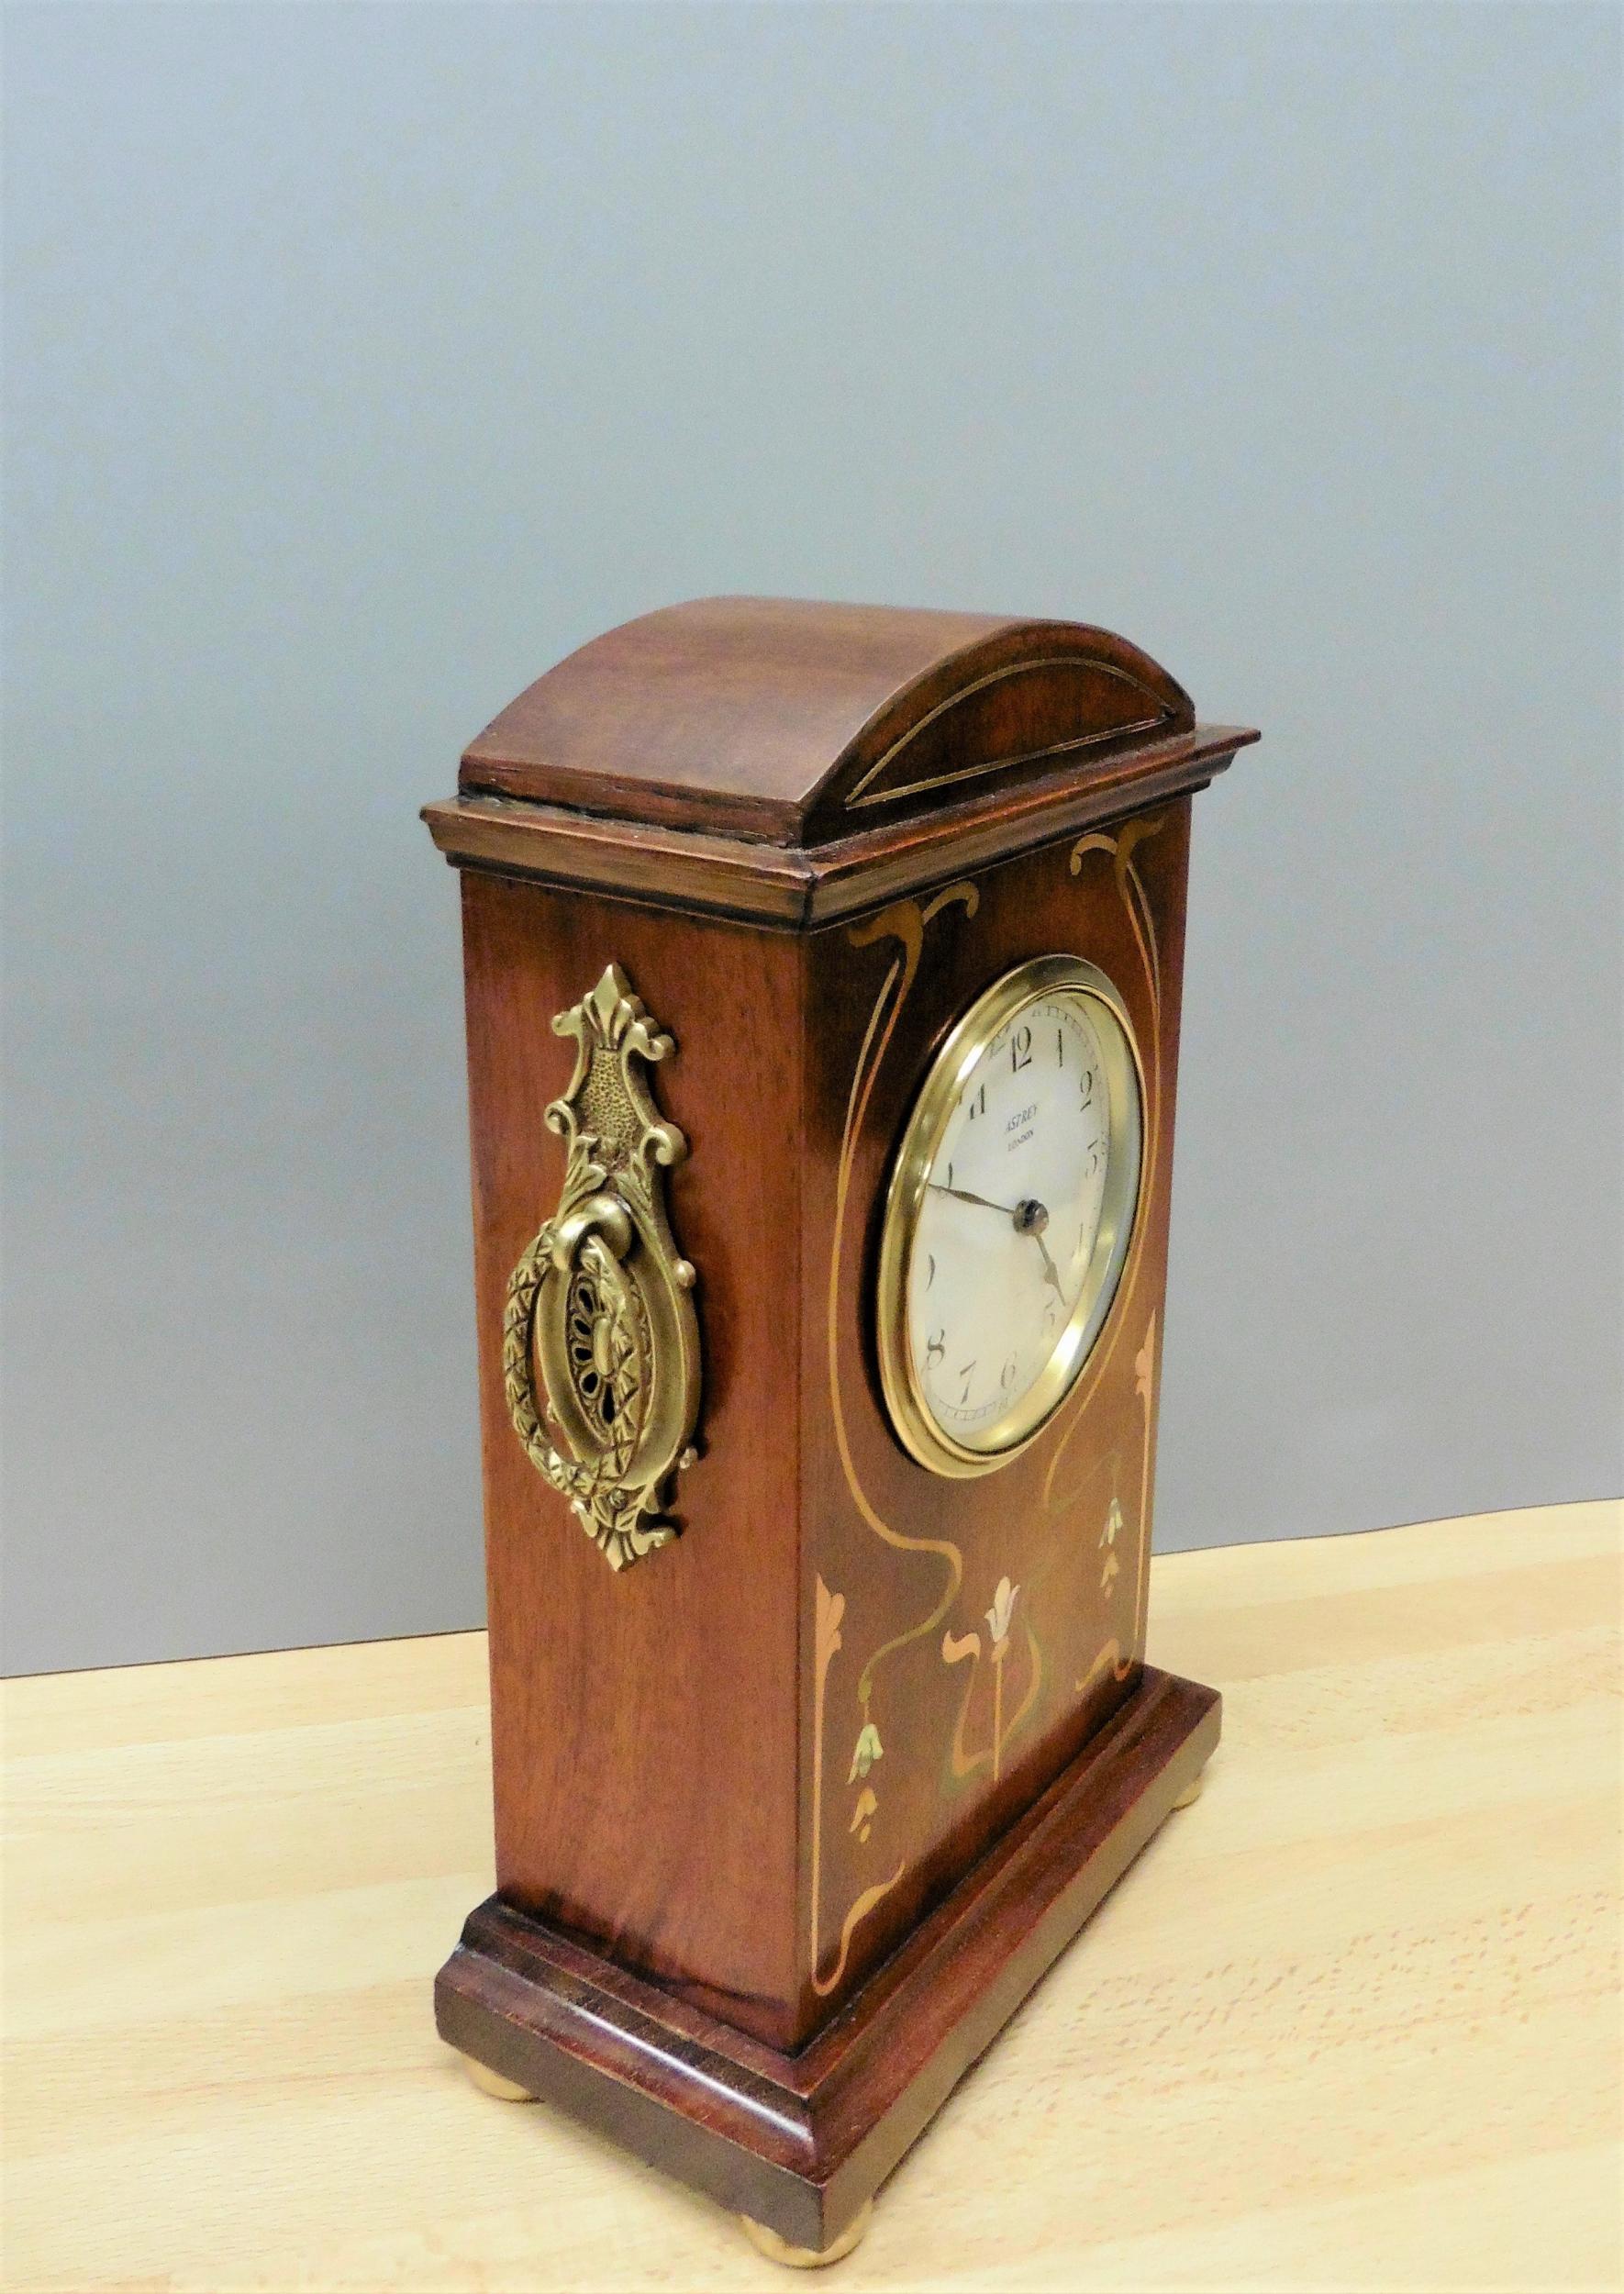 Art Nouveau mahogany mantel clock

Mahogany cased mantel clock with arch top, brass side carrying handles and satinwood and mother of pearl stringing and floral inlay standing on a stepped moulded plinth and resting on four brass bun